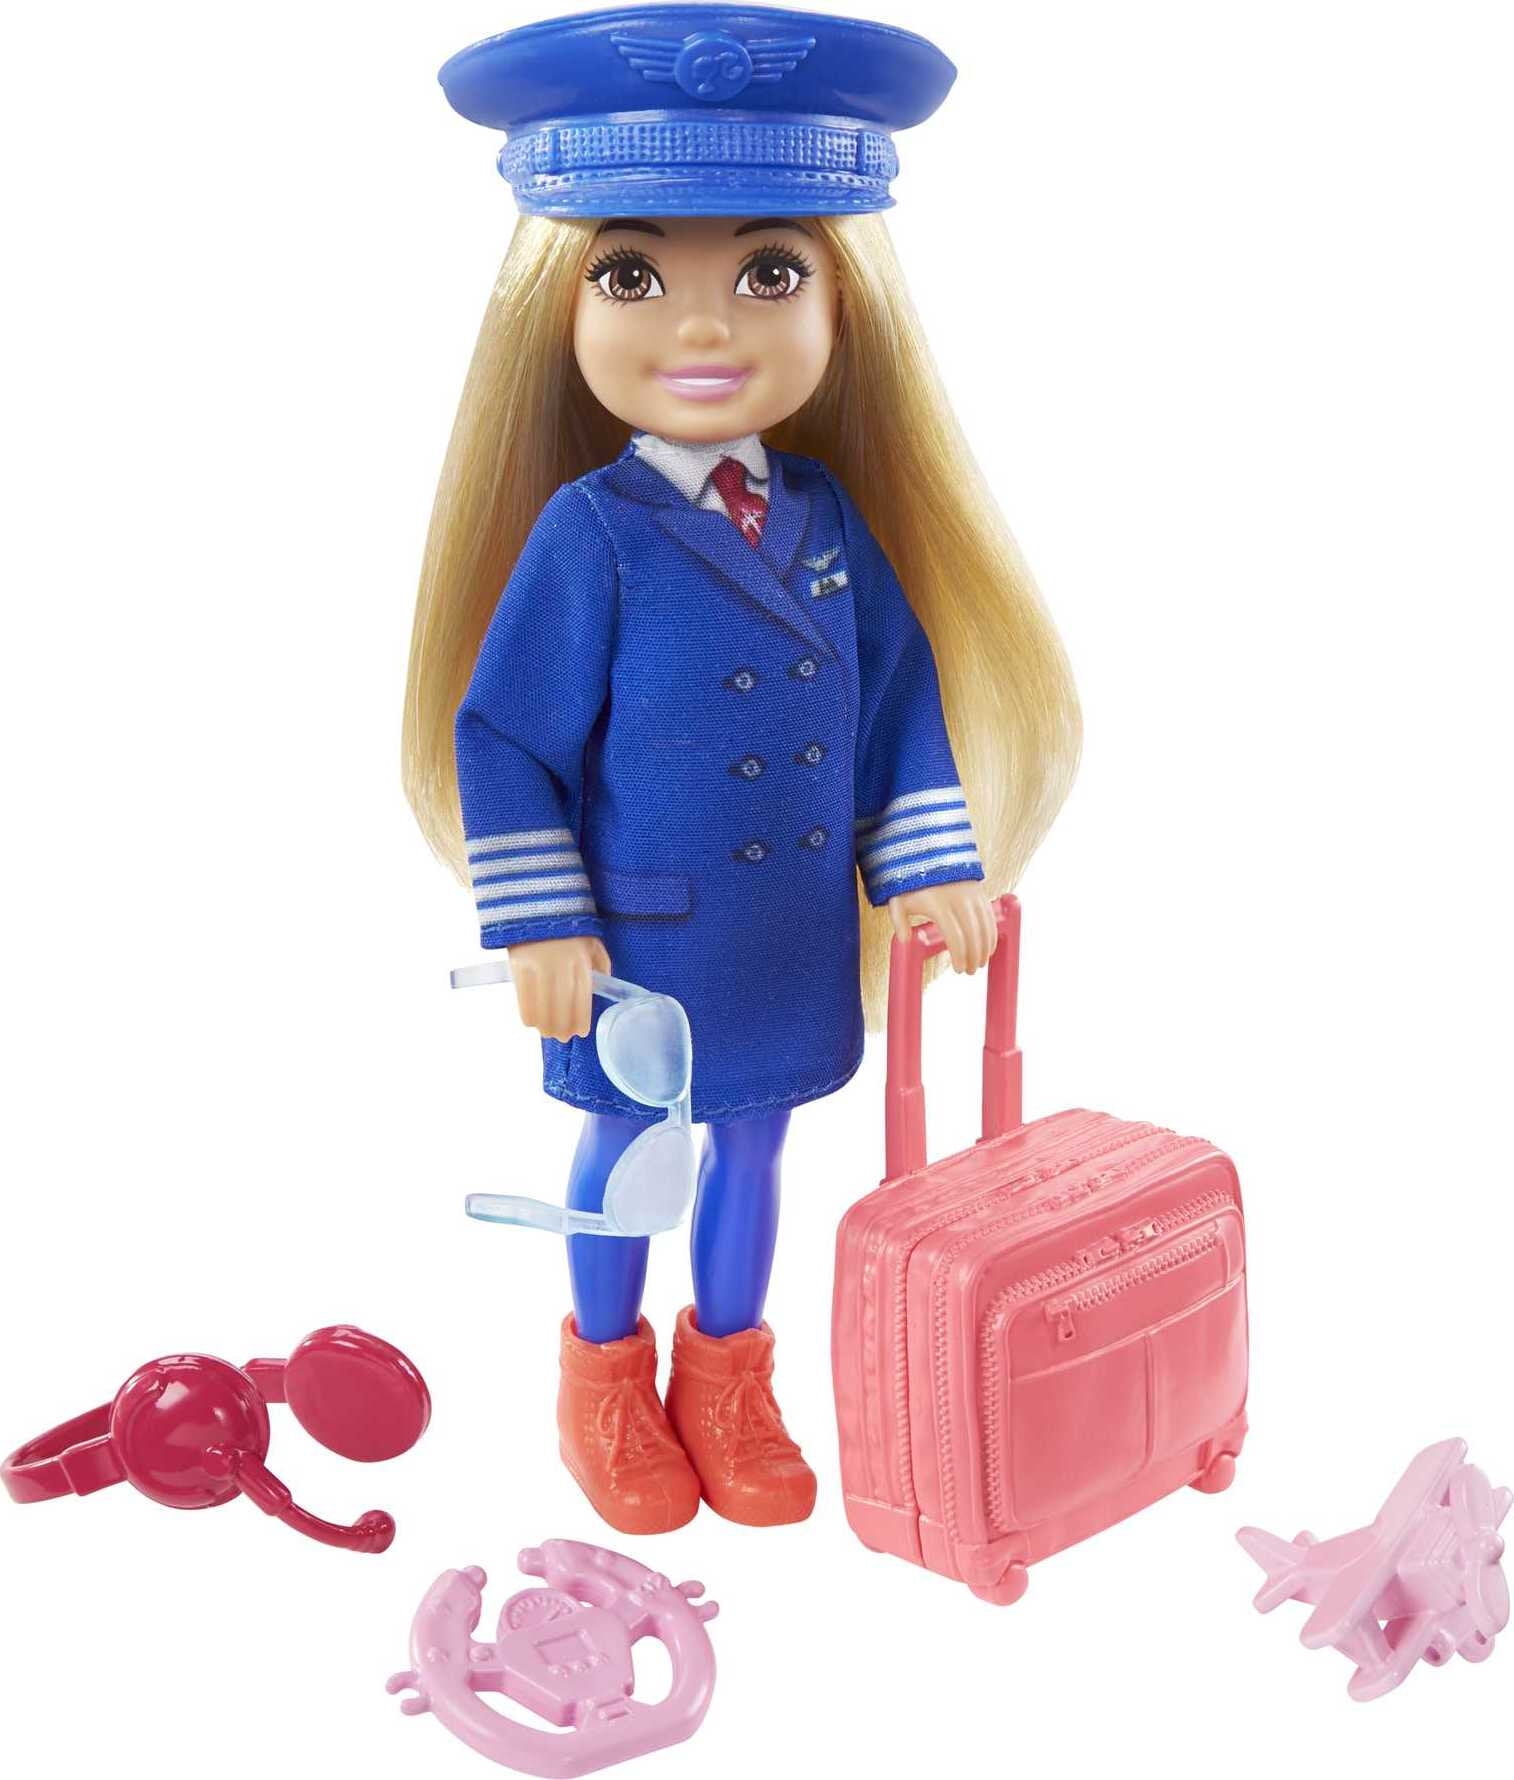 Girl's Barbie Dreamhouse Adventures Travel Doll & Accessories